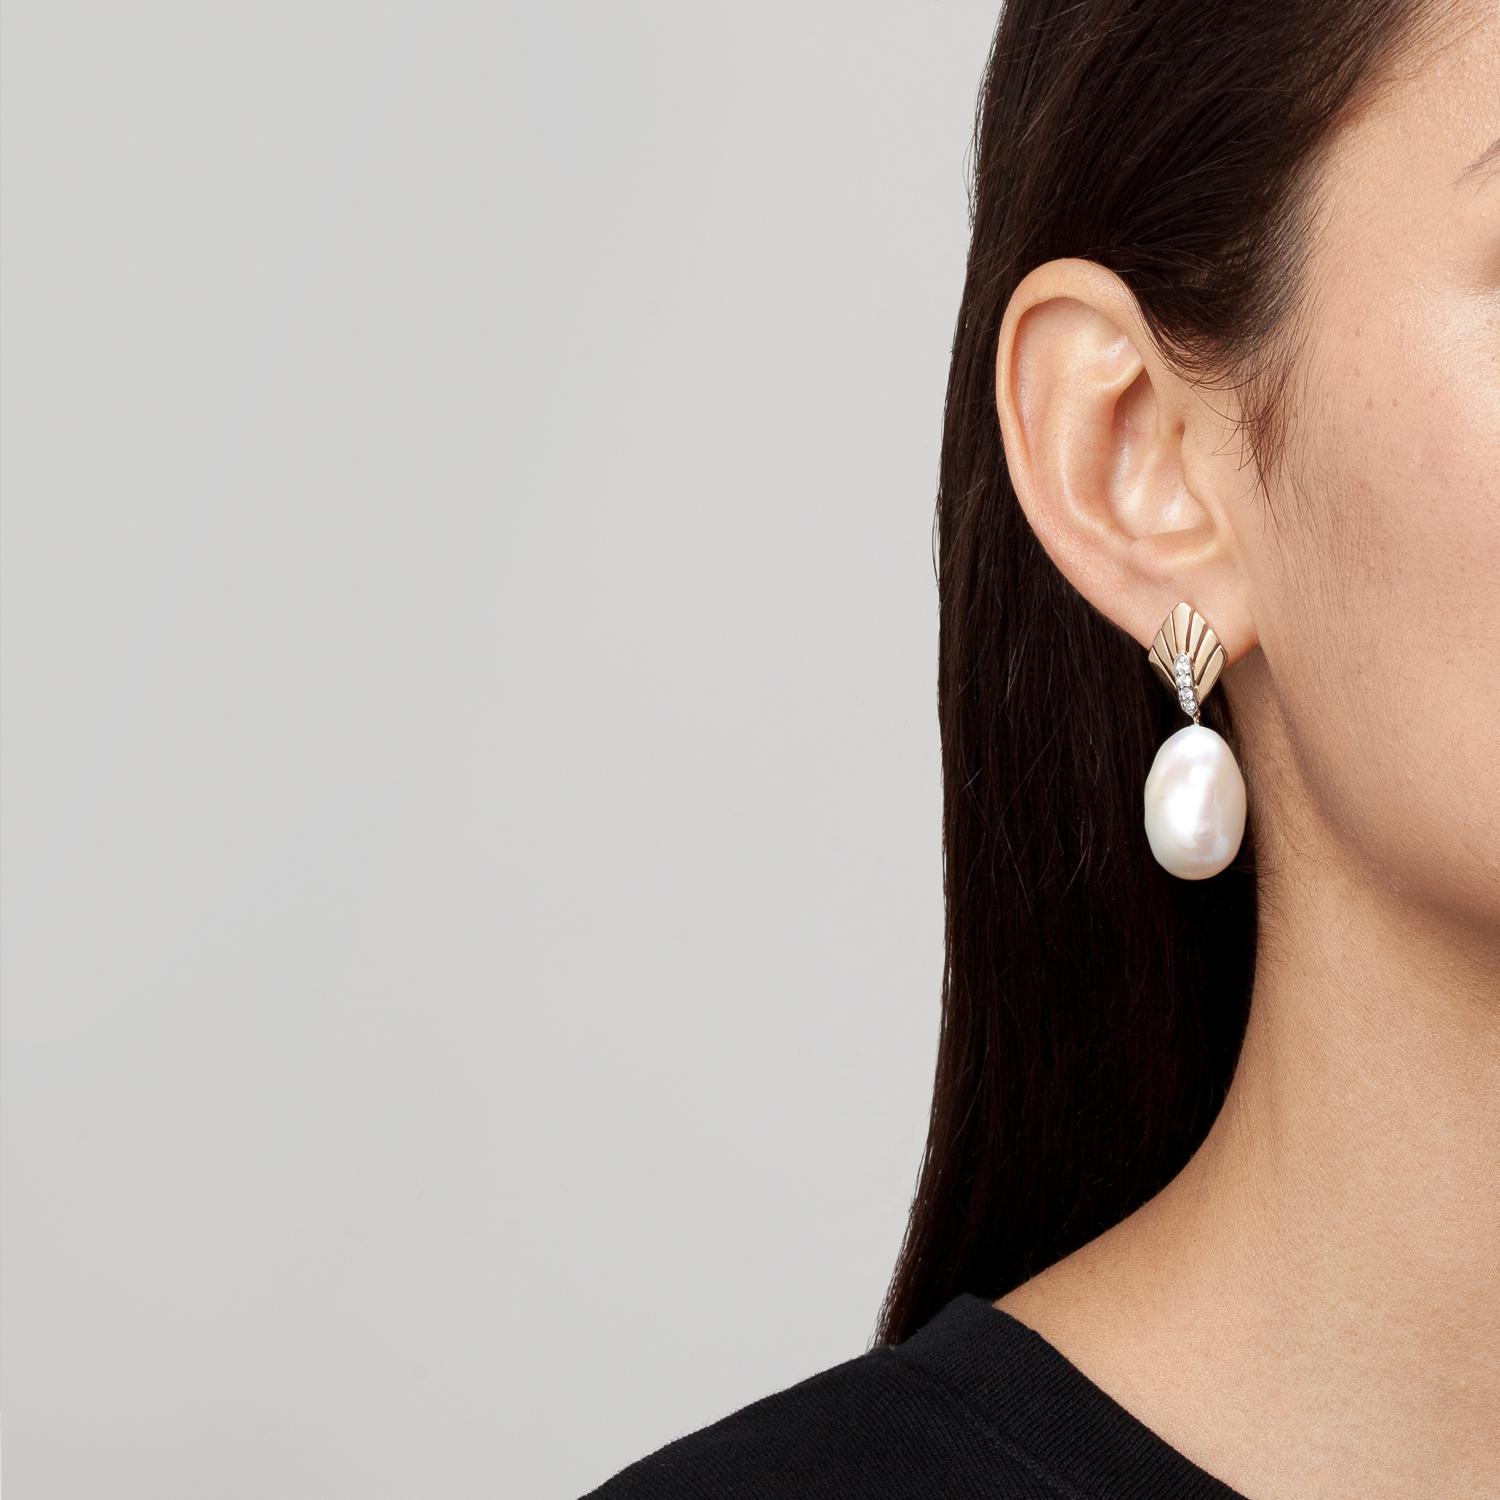 Part of SELIN KENT's tropical-inspired Josephine Collection, these drop earrings feature a geometric top component that contrasts beautifully with the organic baroque pearl drops. 

Diamond carat weight: 0.25c
Total length: 2''
Available in 14k